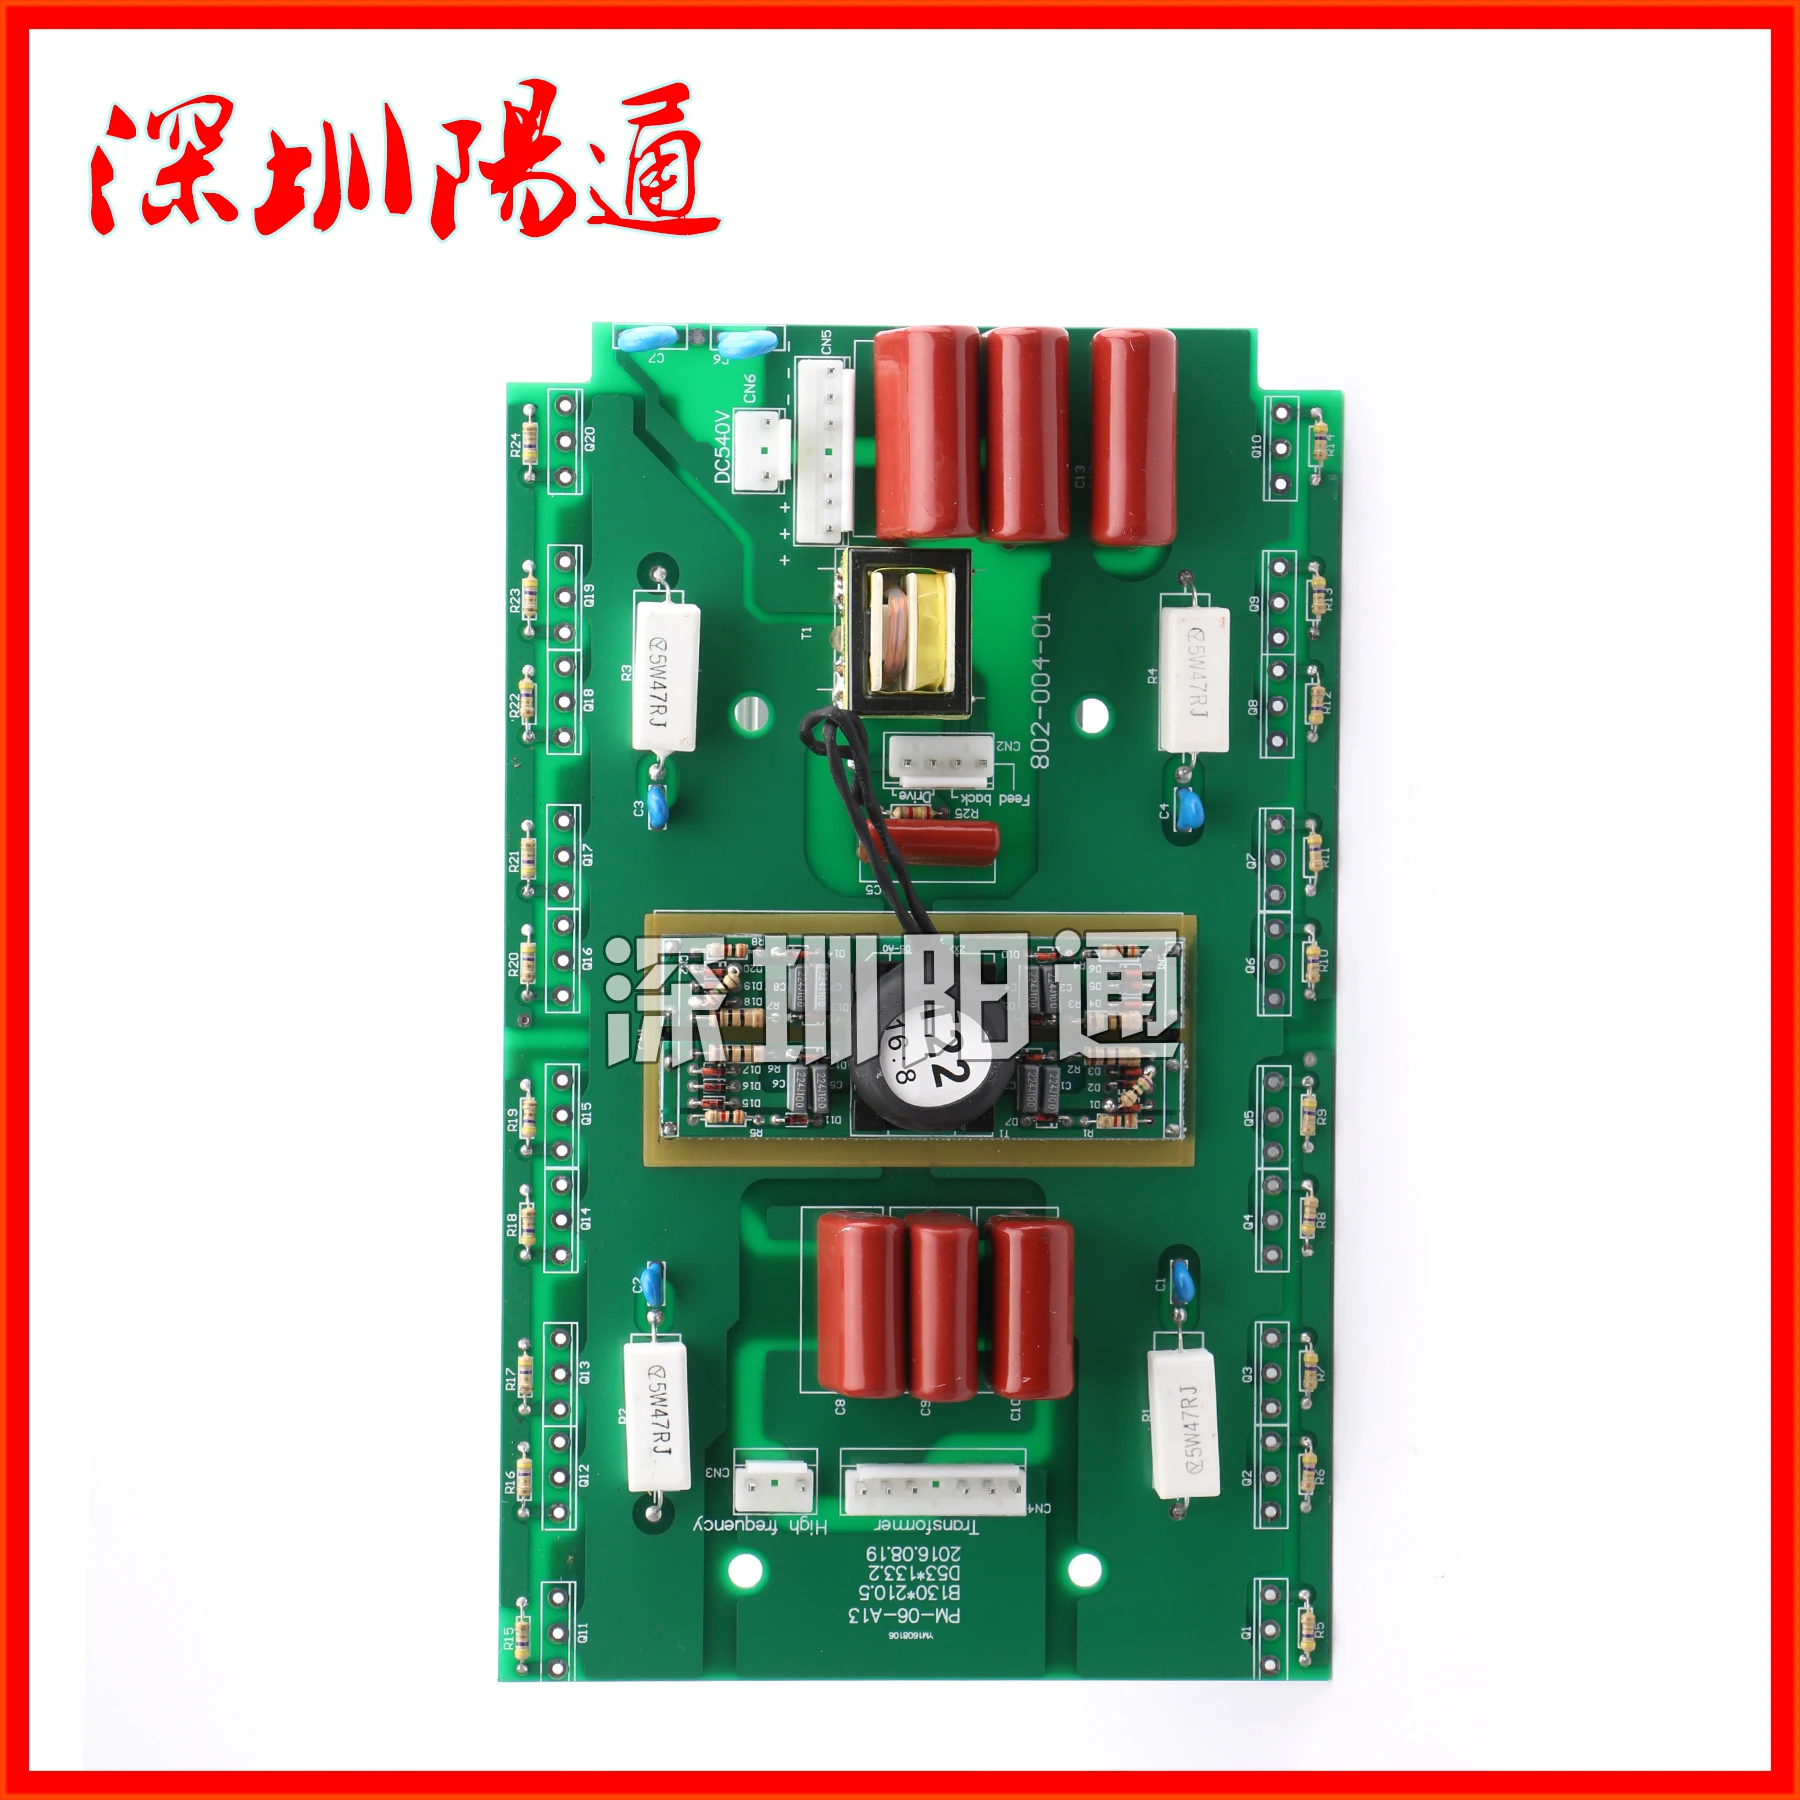 

Inverter Welding Machine Three-phase 380V Inverter Board 210x130mm PM Circuit Board Repair and Replacement PM-06-A13